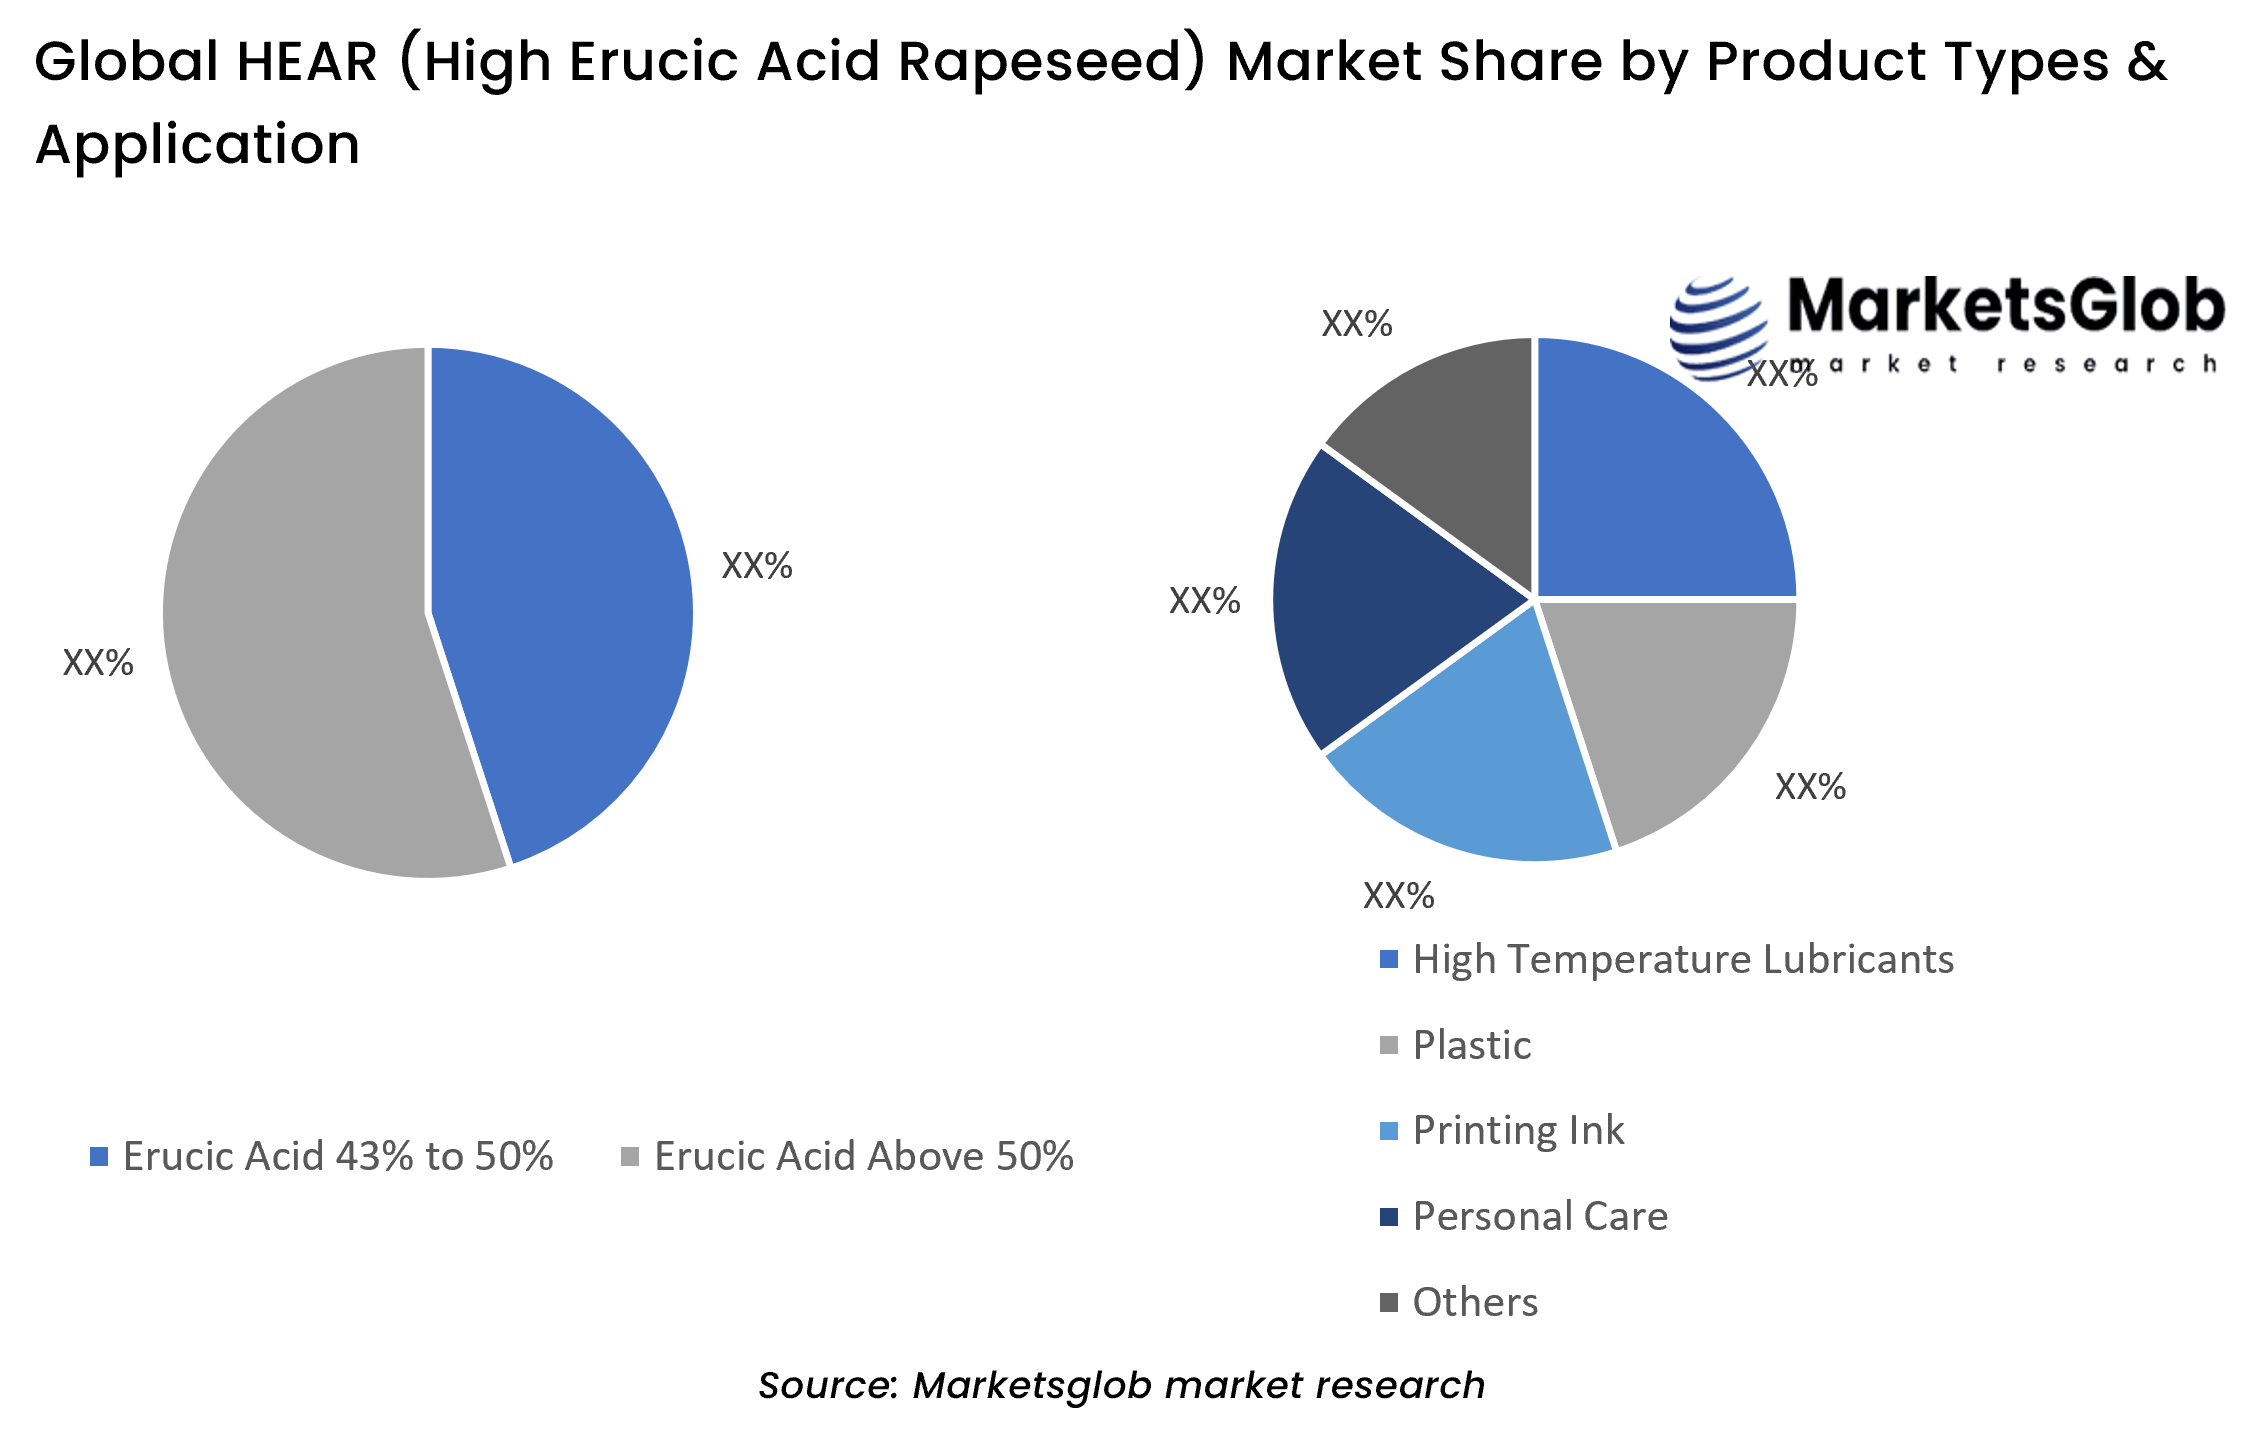 HEAR (High Erucic Acid Rapeseed) Share by Product Types & Application